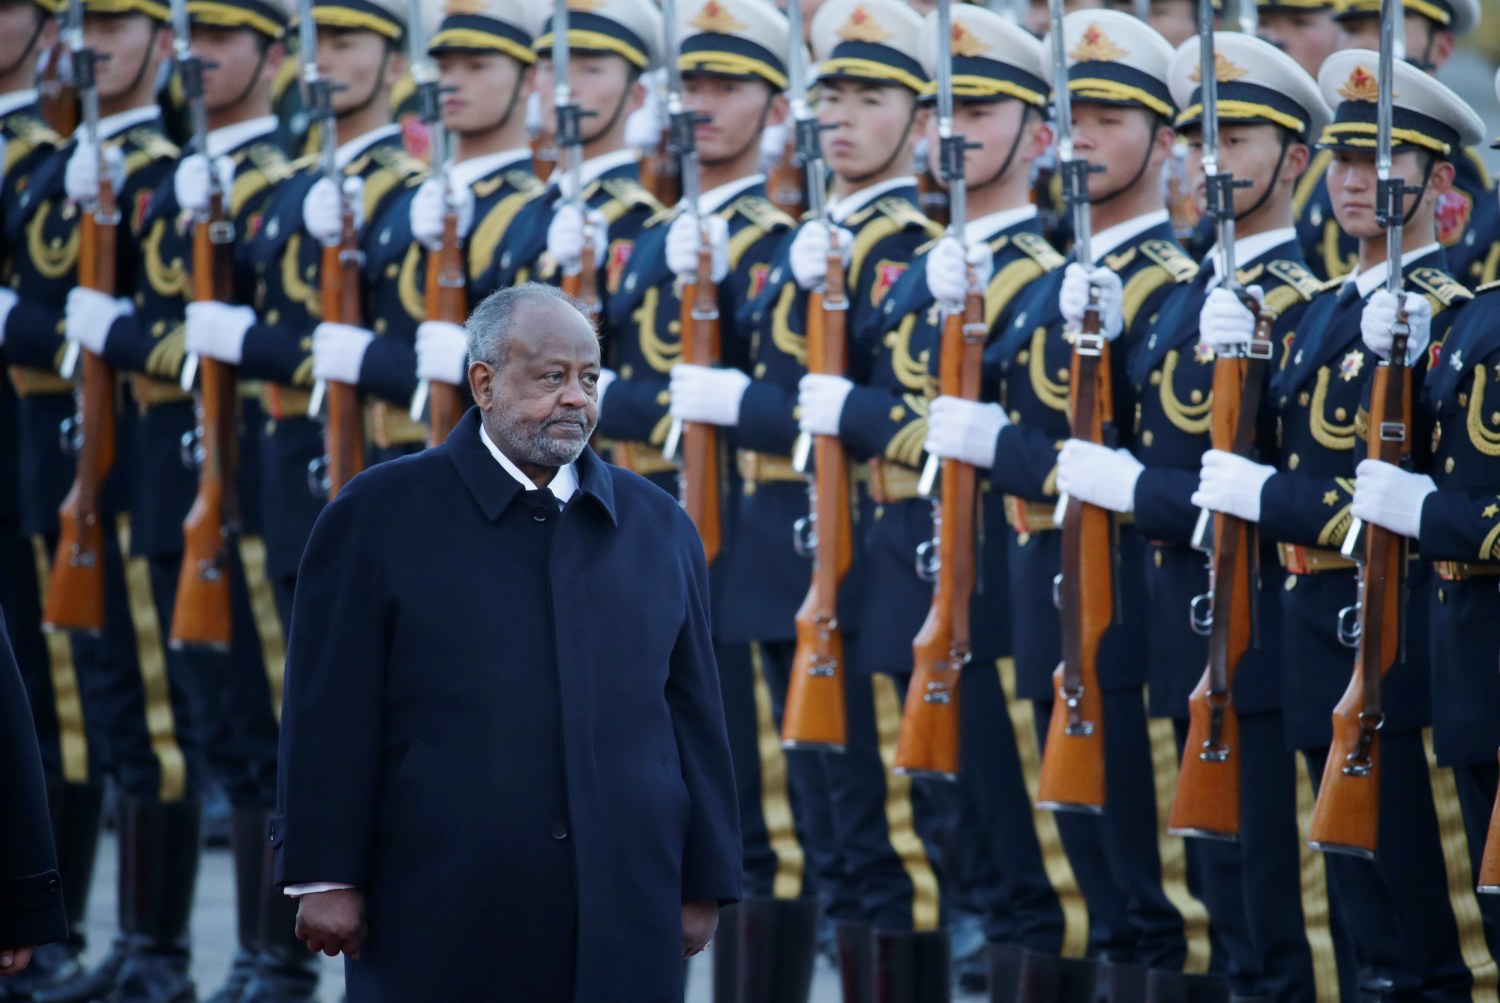 Djibouti's President Ismail Omar Guelleh inspects the honour guard with Chinese President Xi Jinping during a welcoming ceremony at the Great Hall of the People in Beijing, China November 23, 2017. REUTERS/Jason Lee